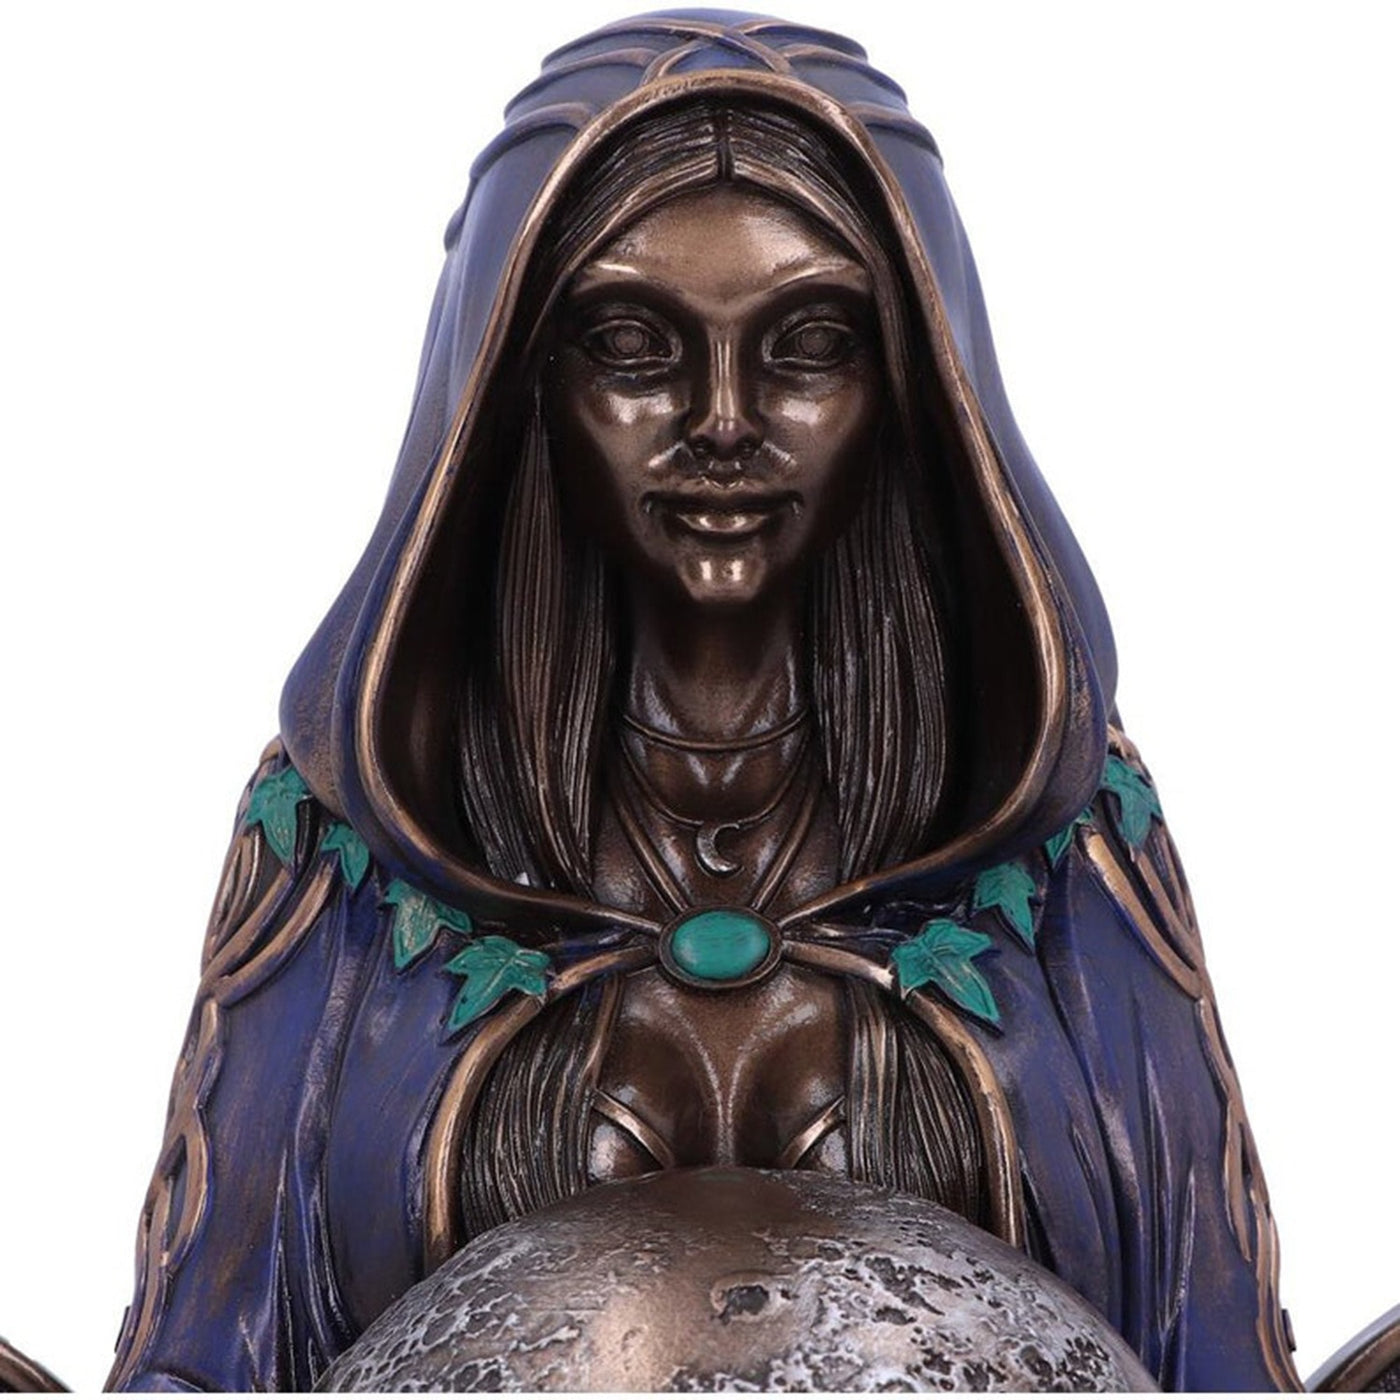 Statue of Mother Earth Figurine